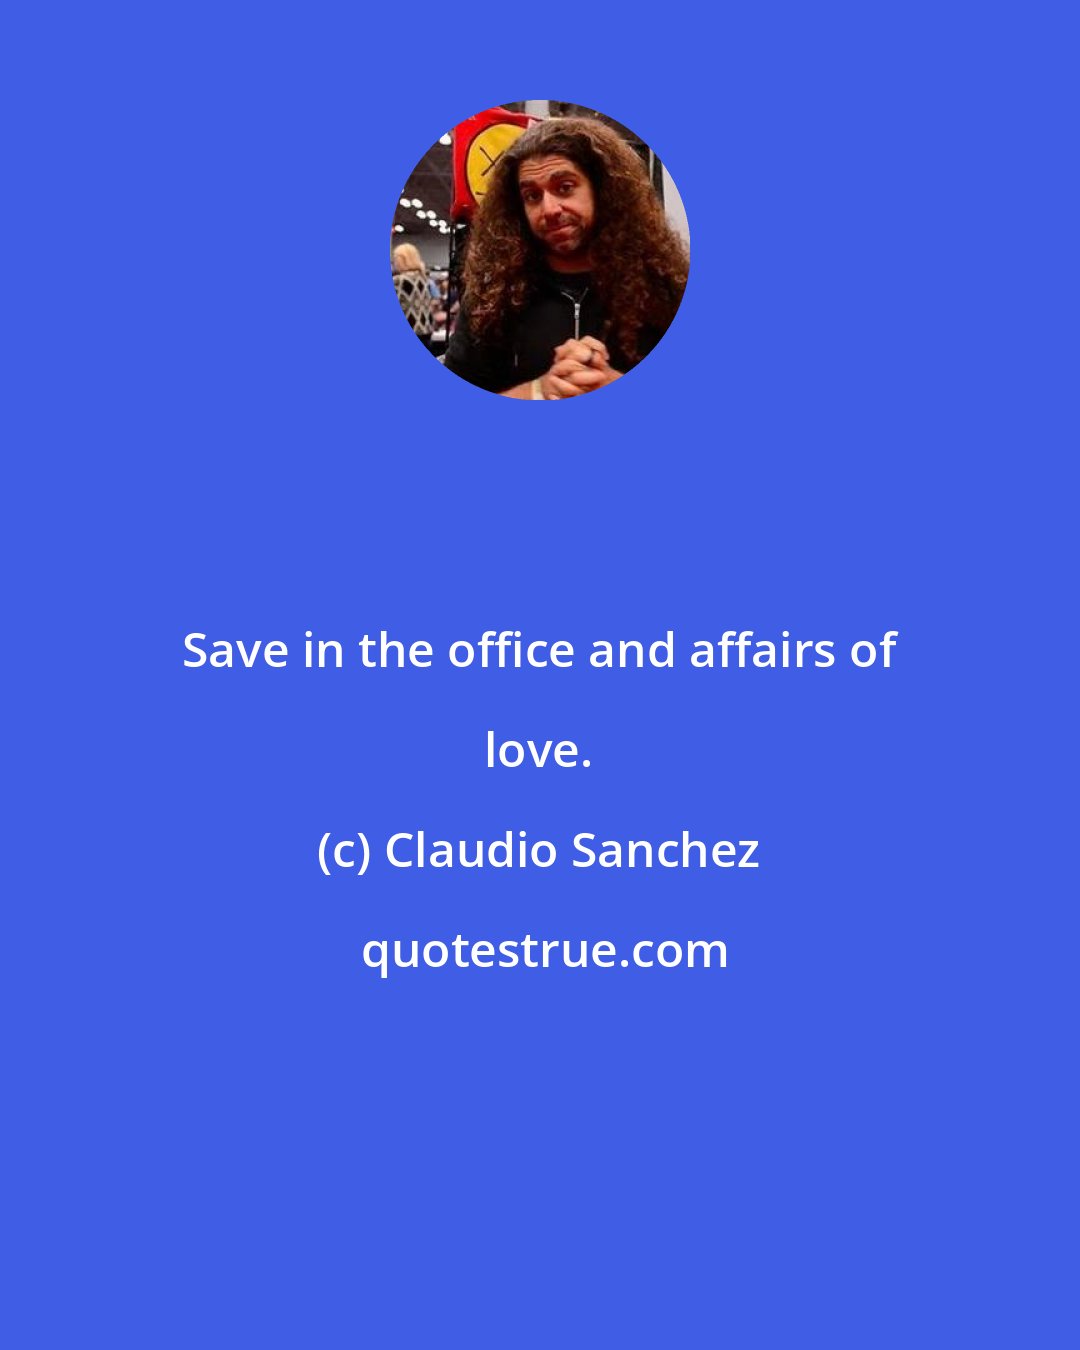 Claudio Sanchez: Save in the office and affairs of love.